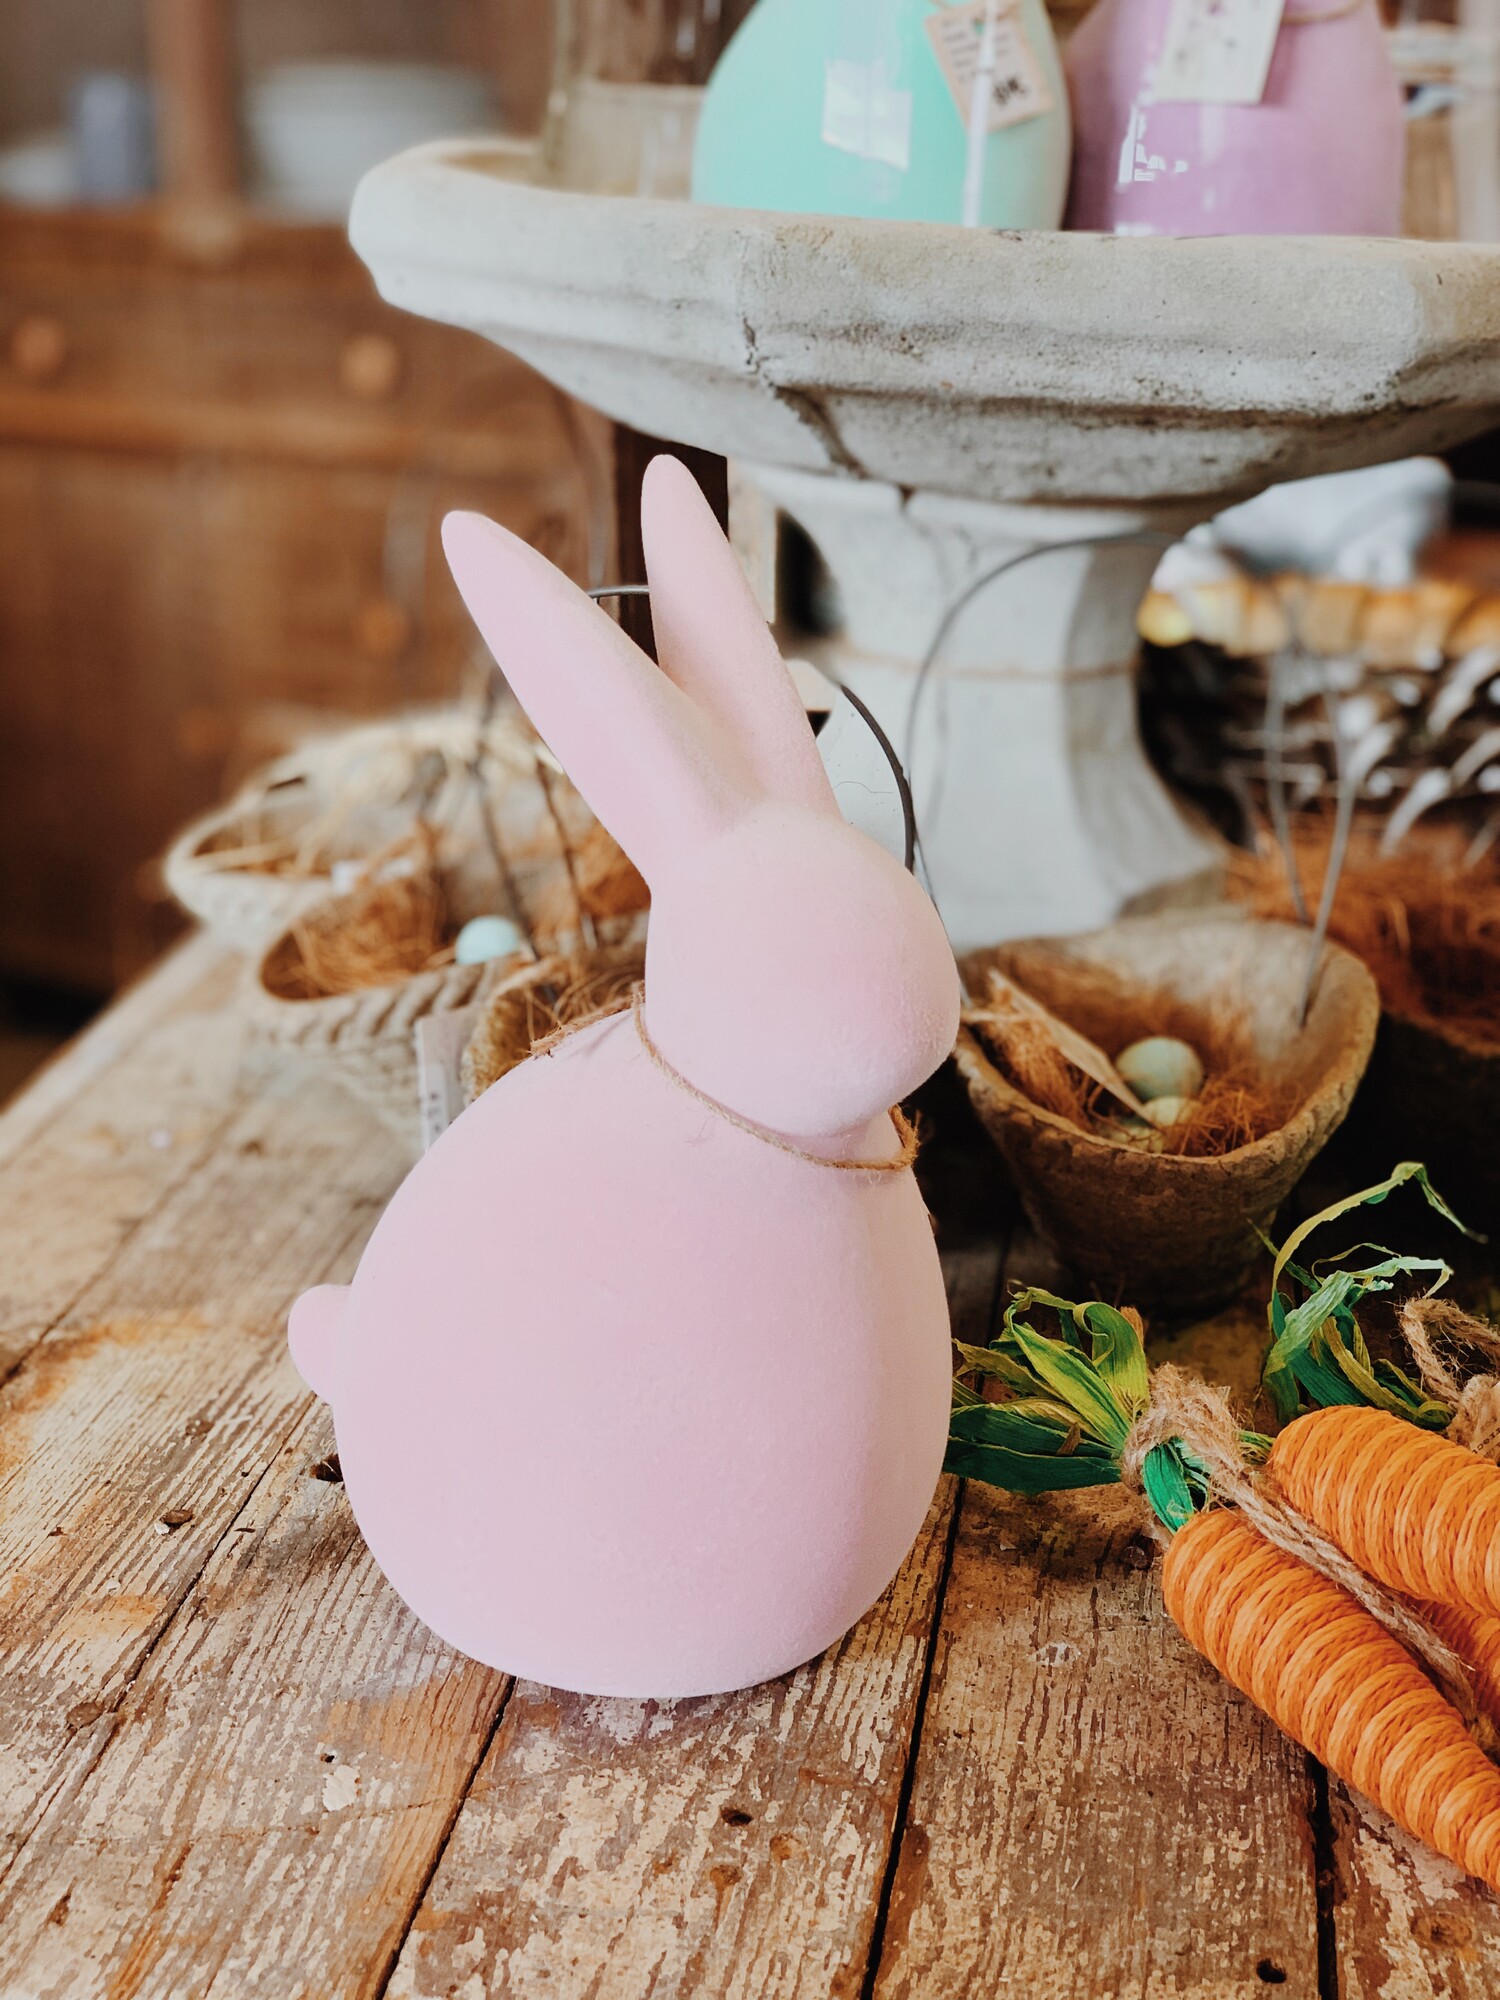 These adorable velveteen easter bunnies are perfect for spring decor! They measure 9 inches tall by 5 inches wide and are available in green, pink, or purple!